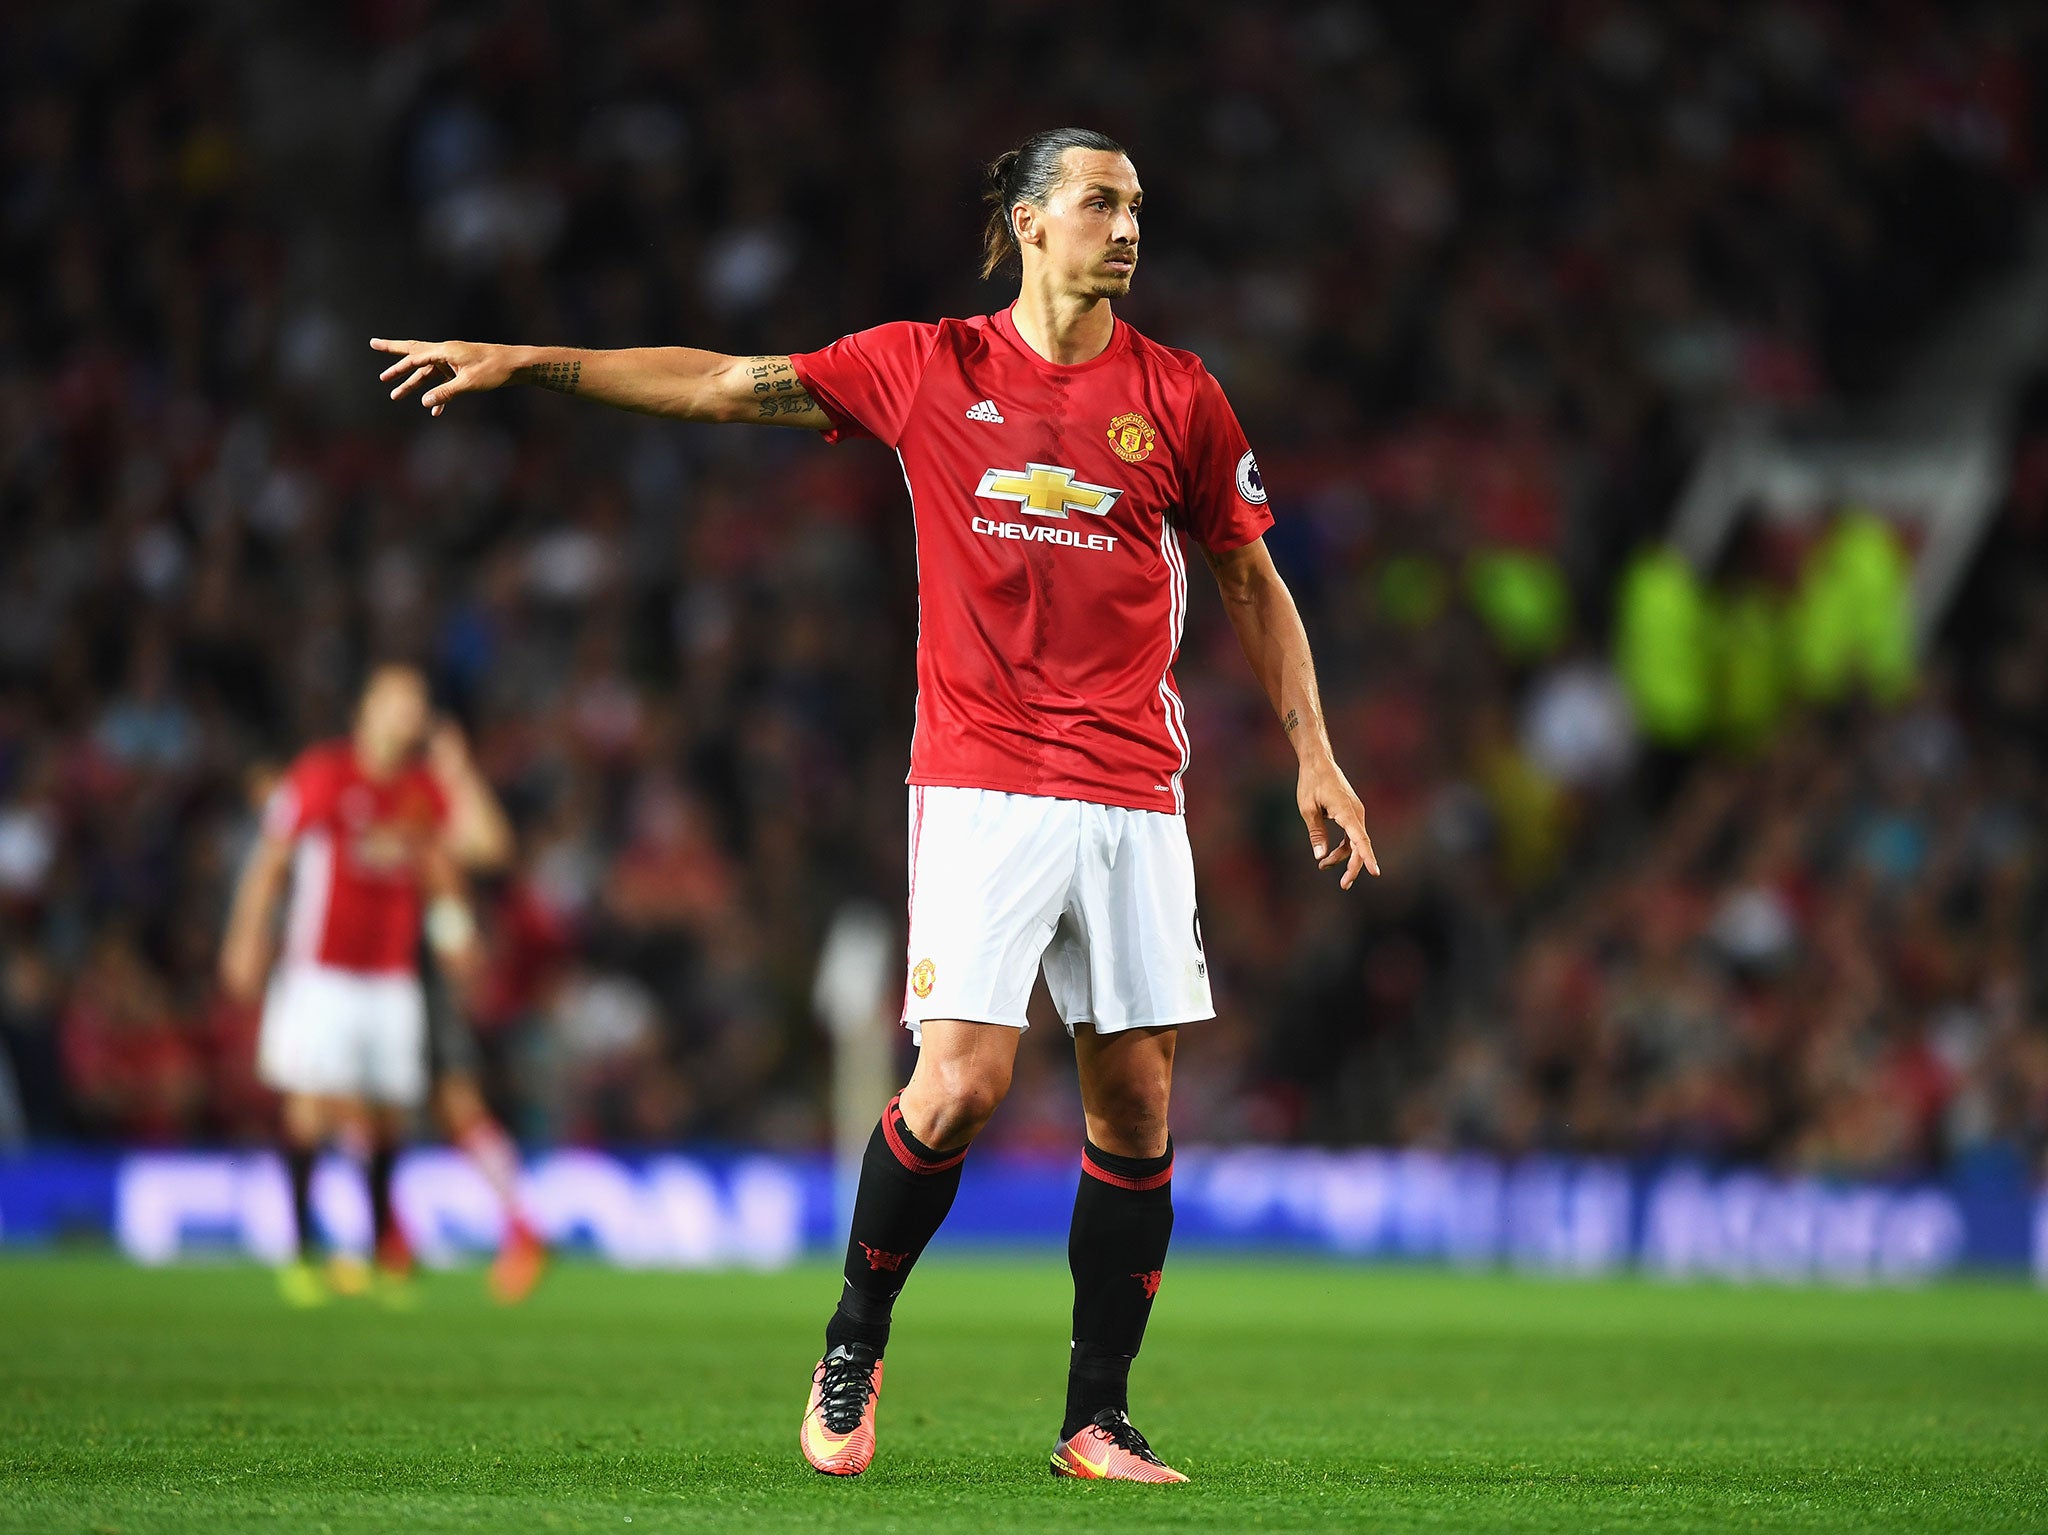 Zlatan Ibrahimovic has got off to a flying start at Old Trafford